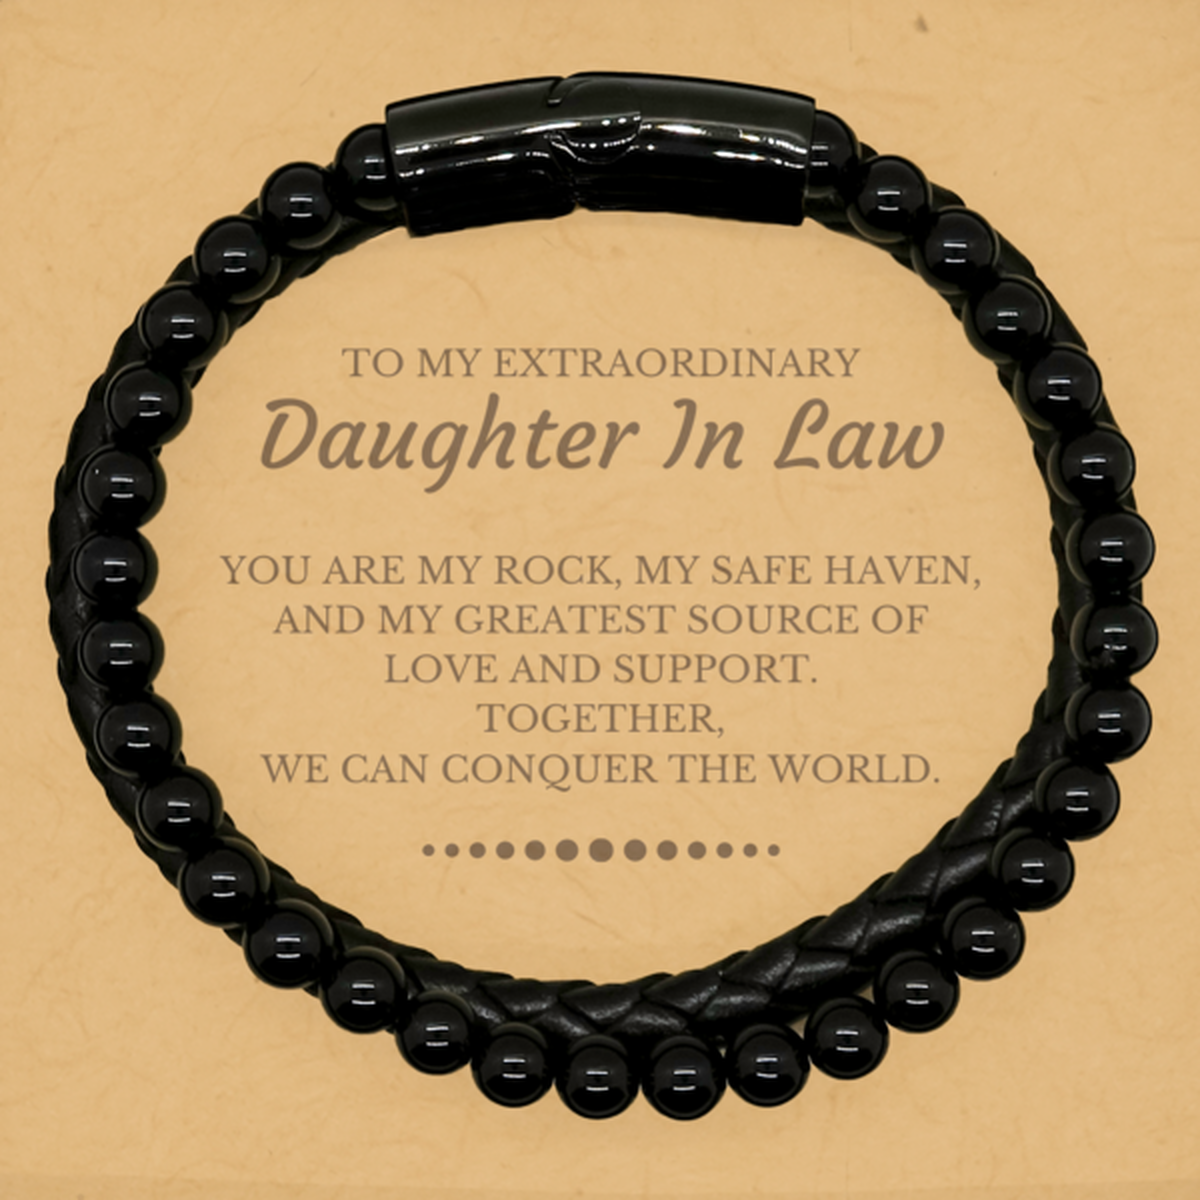 To My Extraordinary Daughter In Law Gifts, Together, we can conquer the world, Birthday Stone Leather Bracelets For Daughter In Law, Christmas Gifts For Daughter In Law